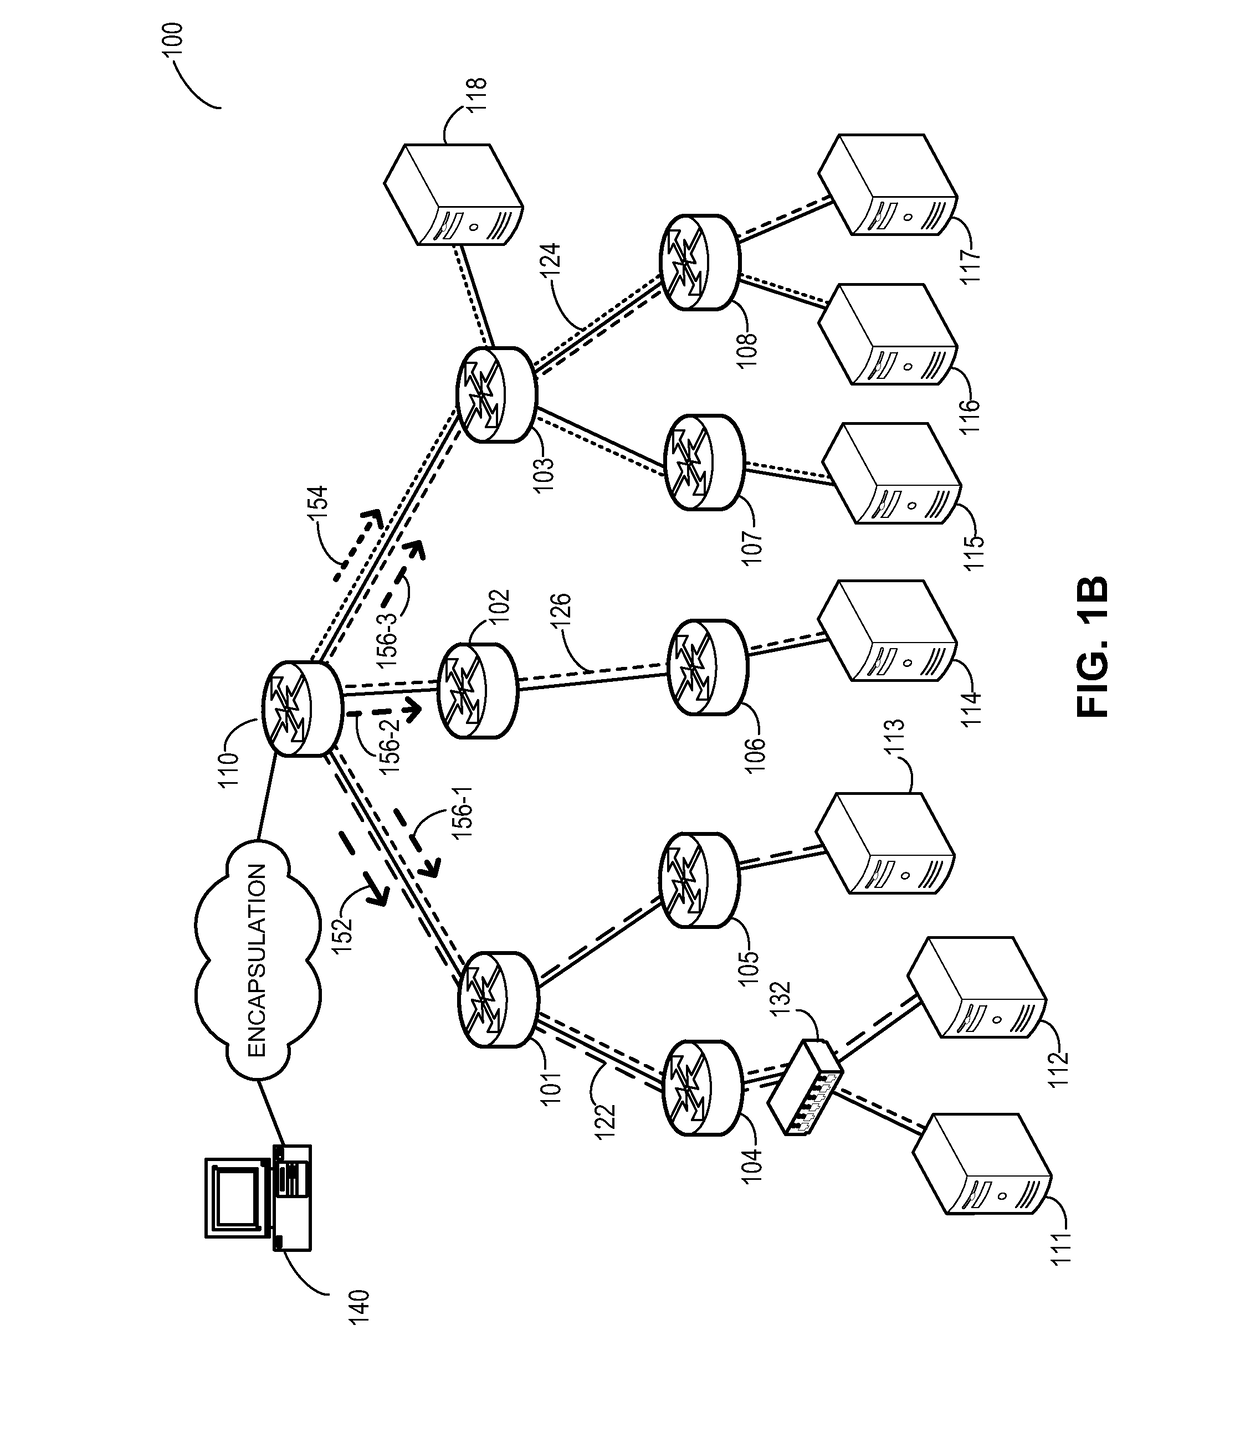 Efficient multicast topology construction in a routed network